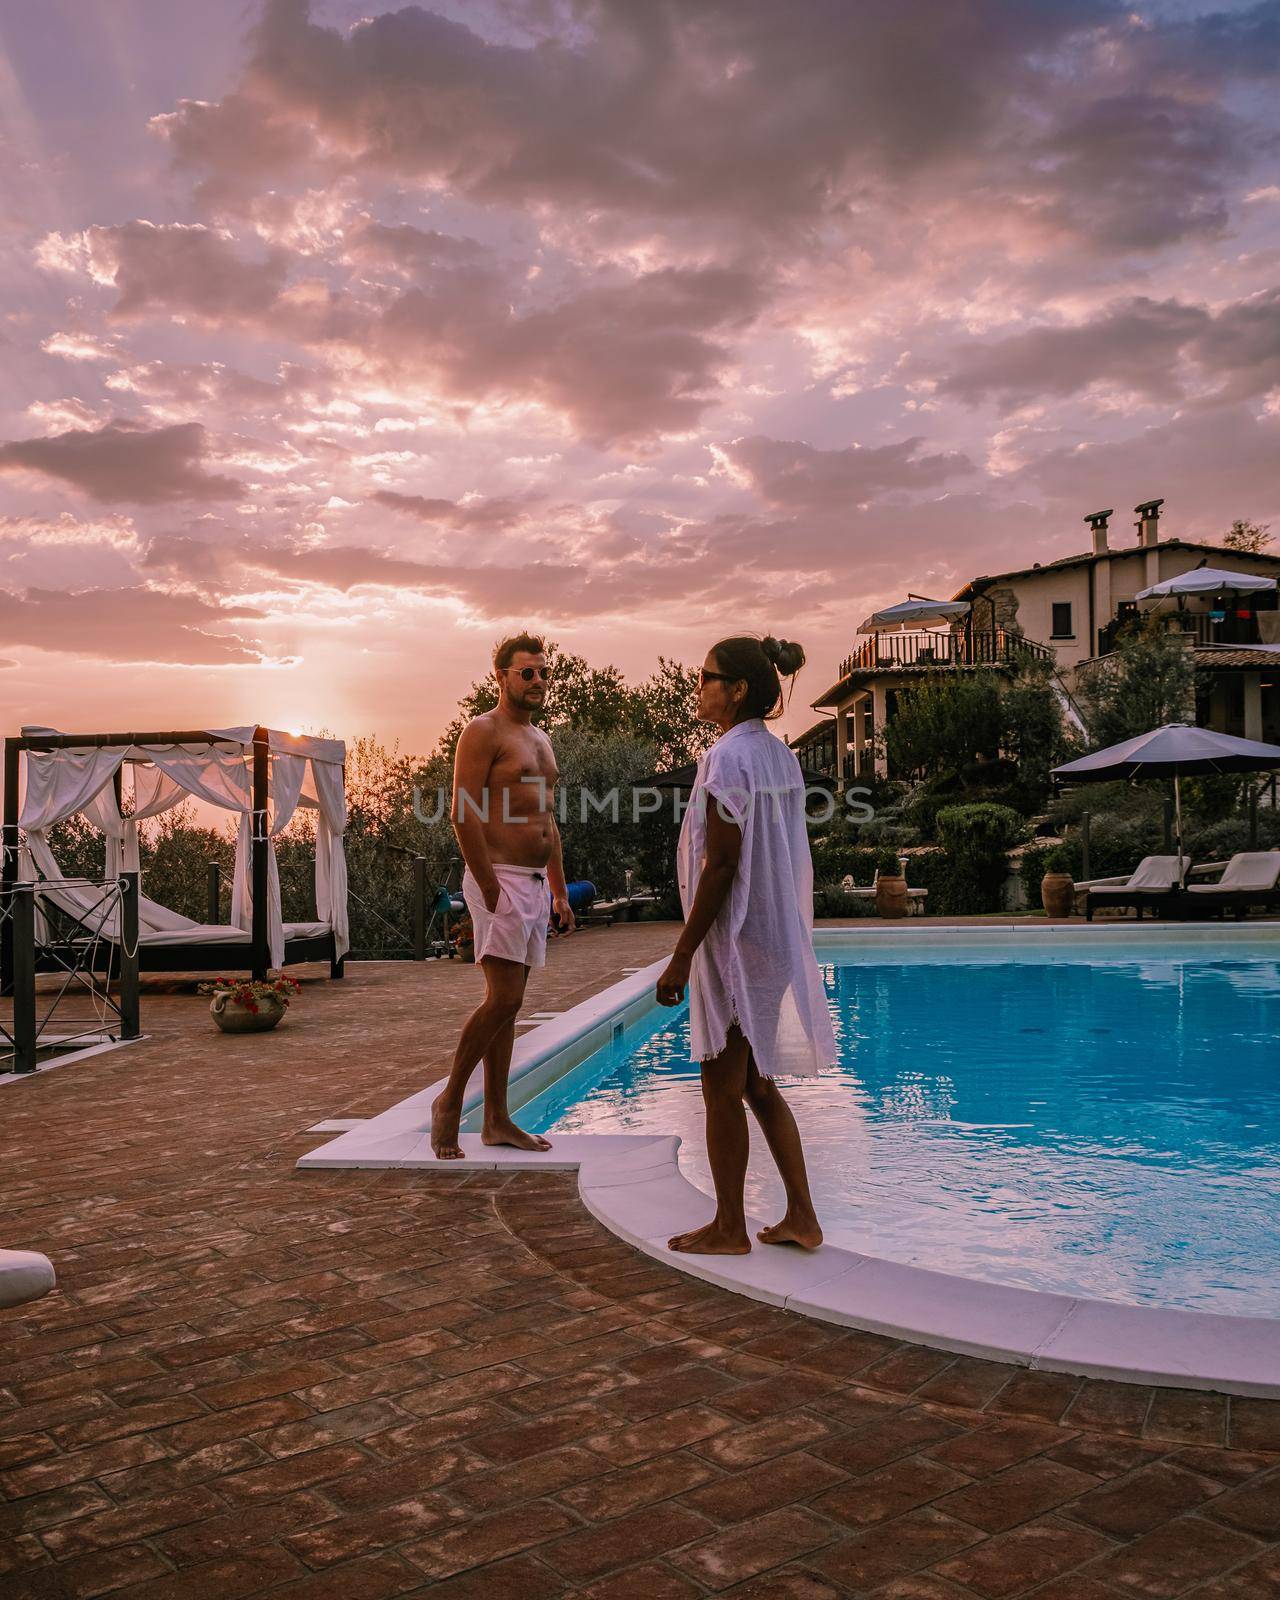 Luxury country house with swimming pool in Italy, Couple on Vacation at luxury villa in Italy, men and woman watching sunset by fokkebok